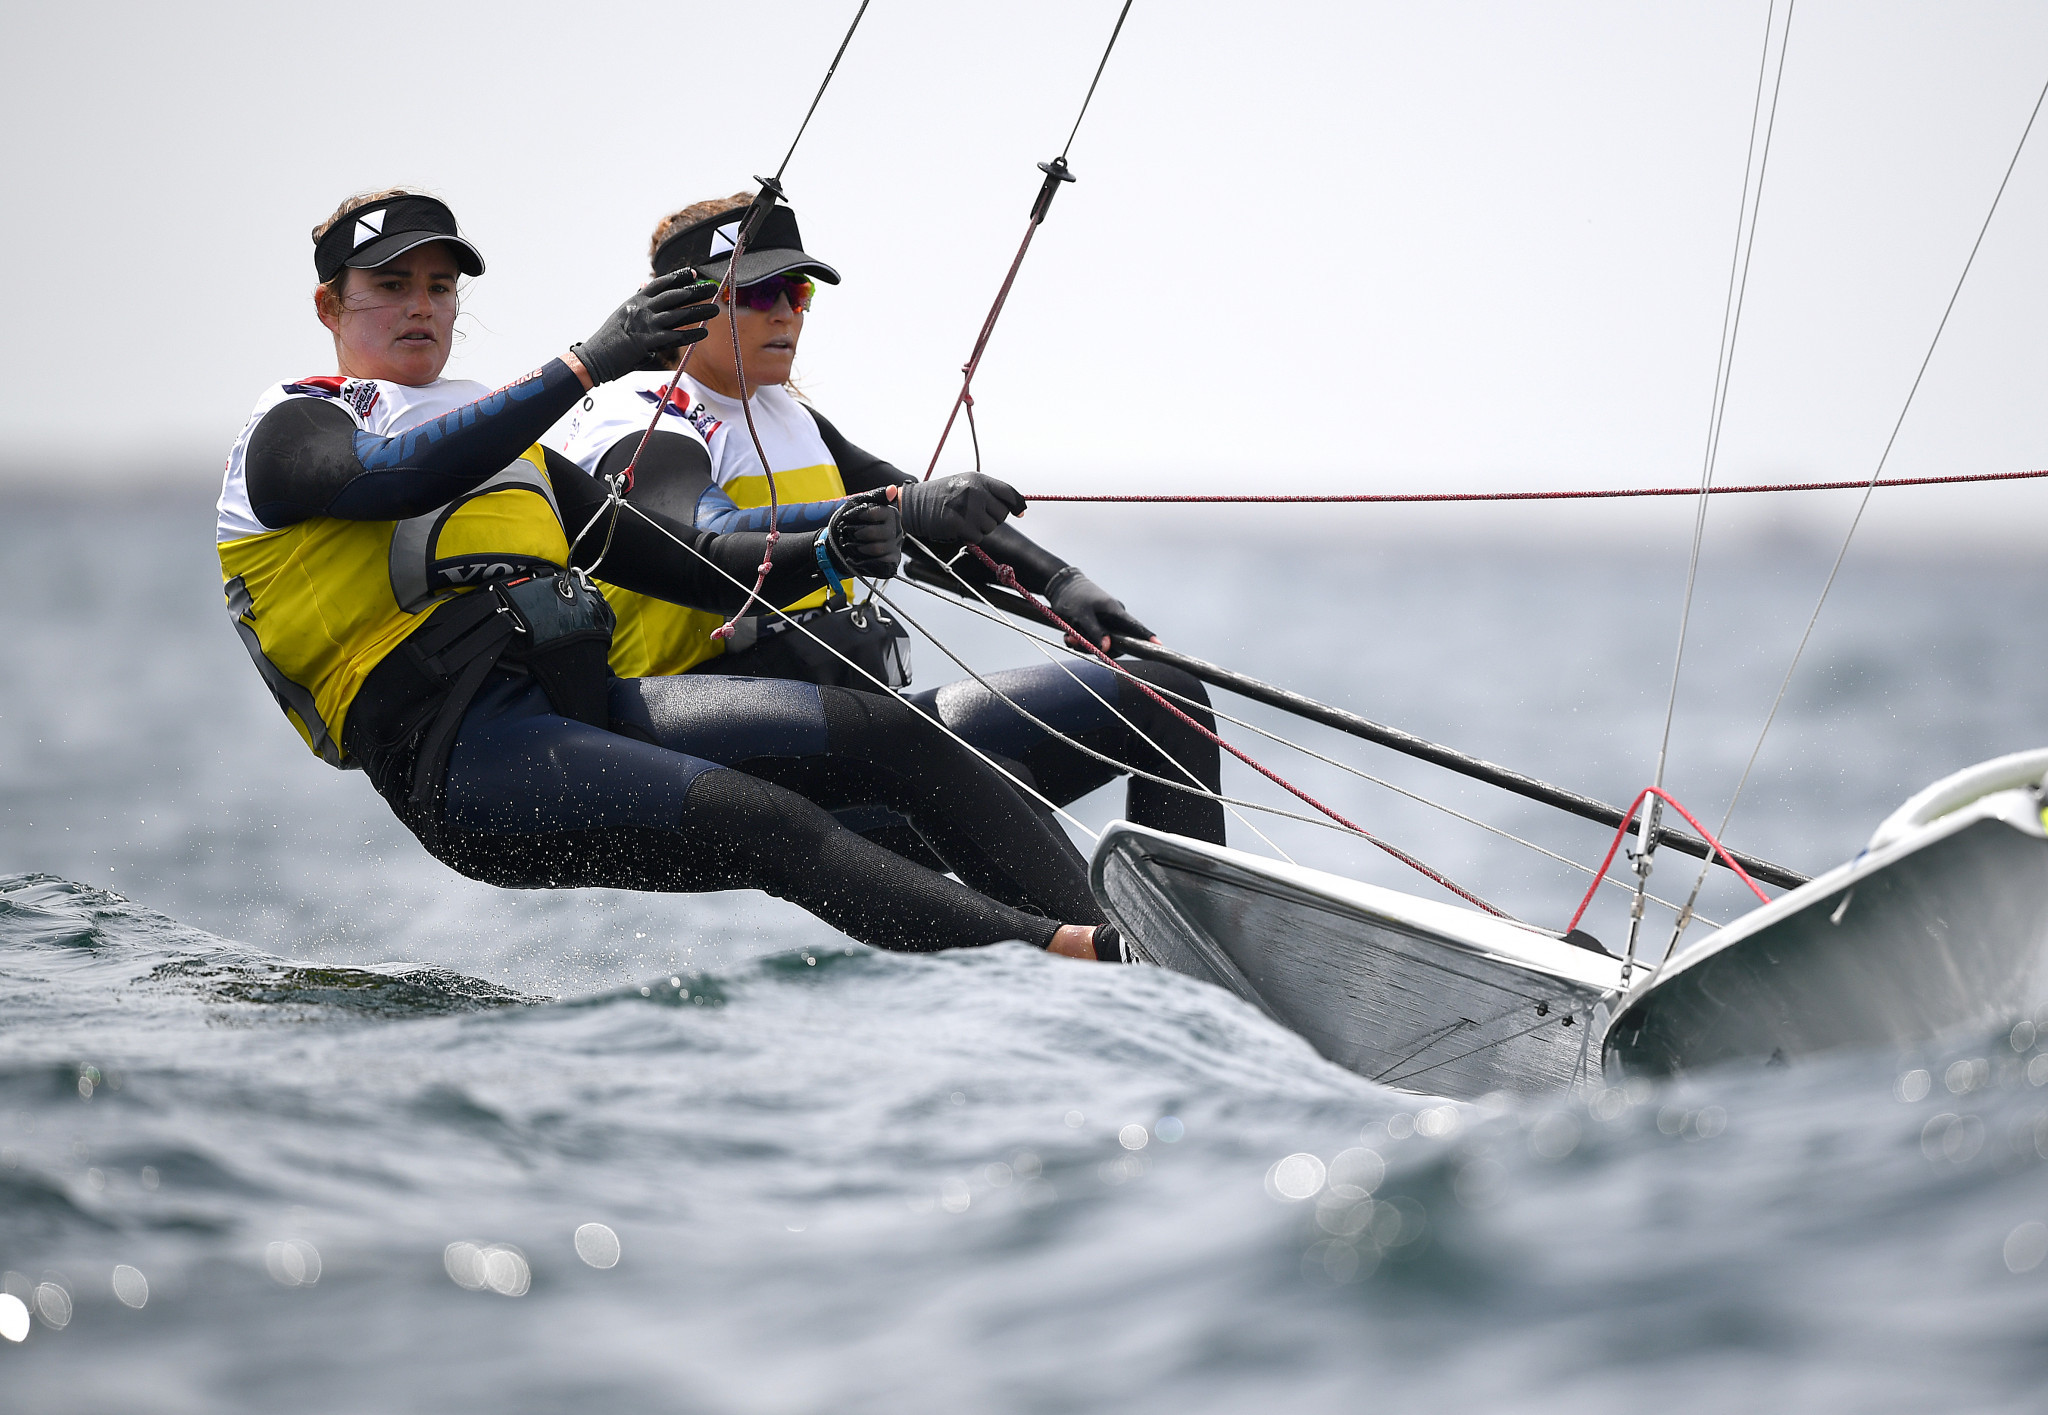 Kahena Kunze and Martine Grael, Rio 2016 gold medallists in the 49erFX sailing, are among the TIM brand ambassadors for Tokyo 2020 ©Getty Images